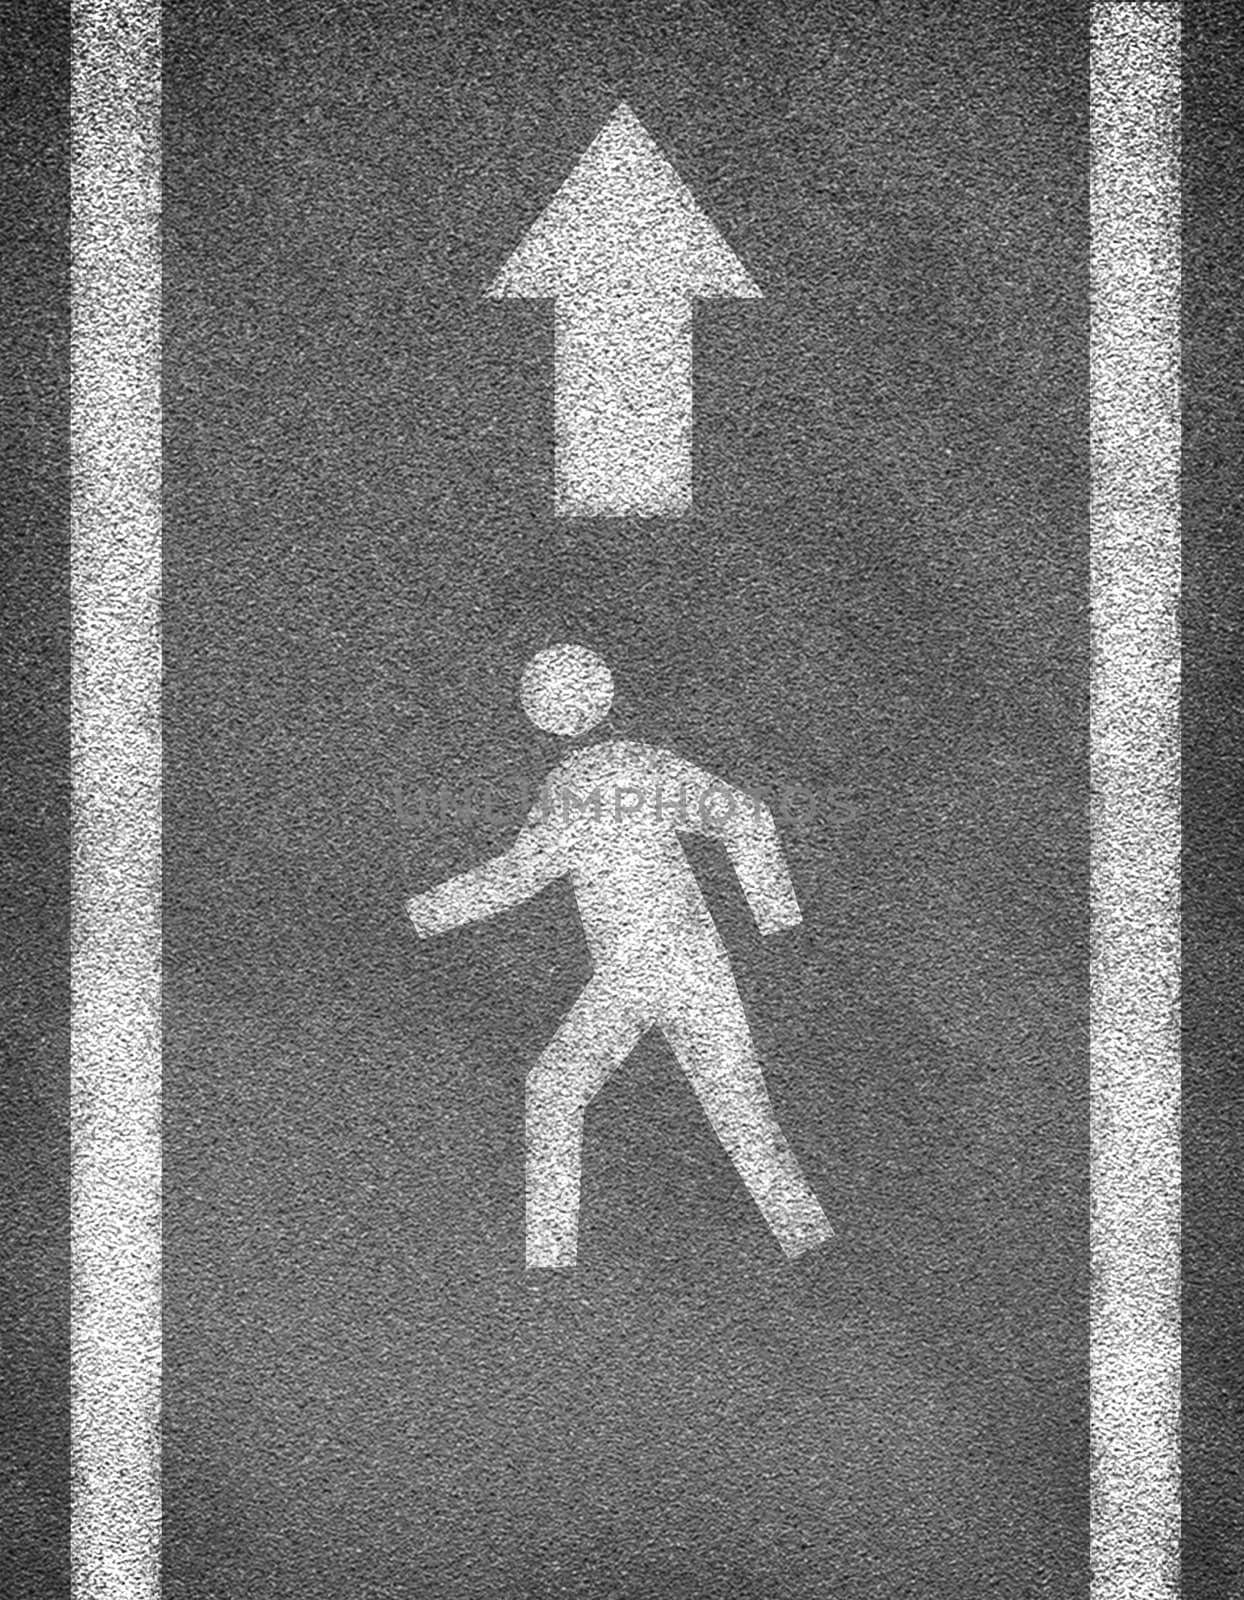 Asphalt road texture with two line and pedestrian sign. Business concept